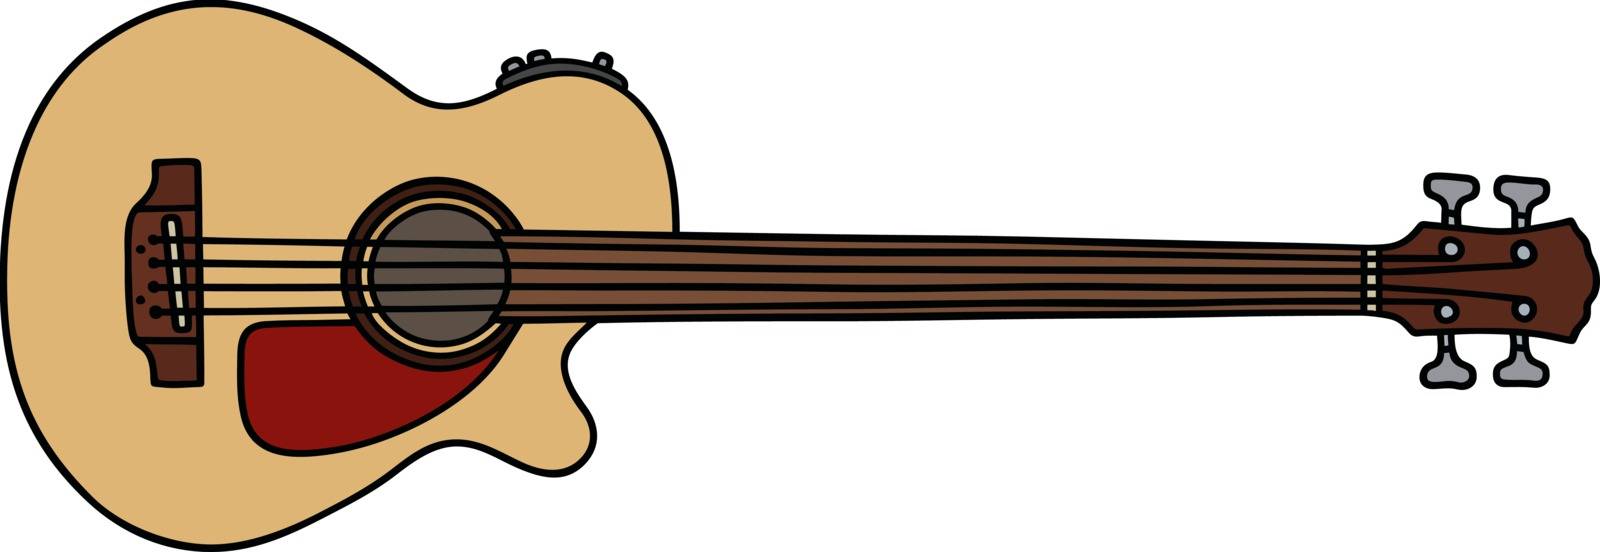 The acoustic fretless bass guitar by vostal